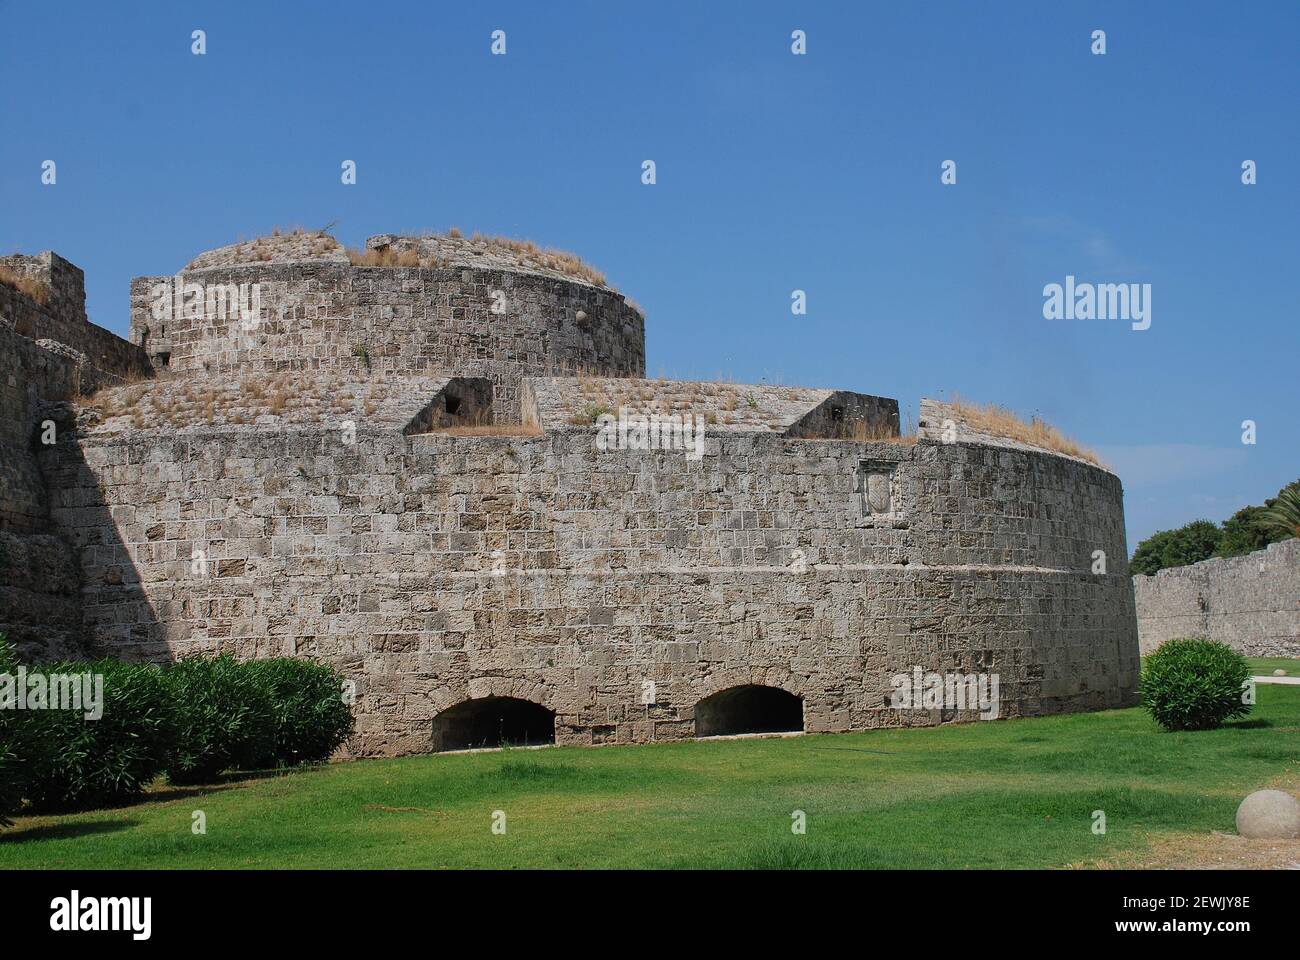 The medieval fortified wall surrounding the Old Town on the Greek island of Rhodes. Stock Photo